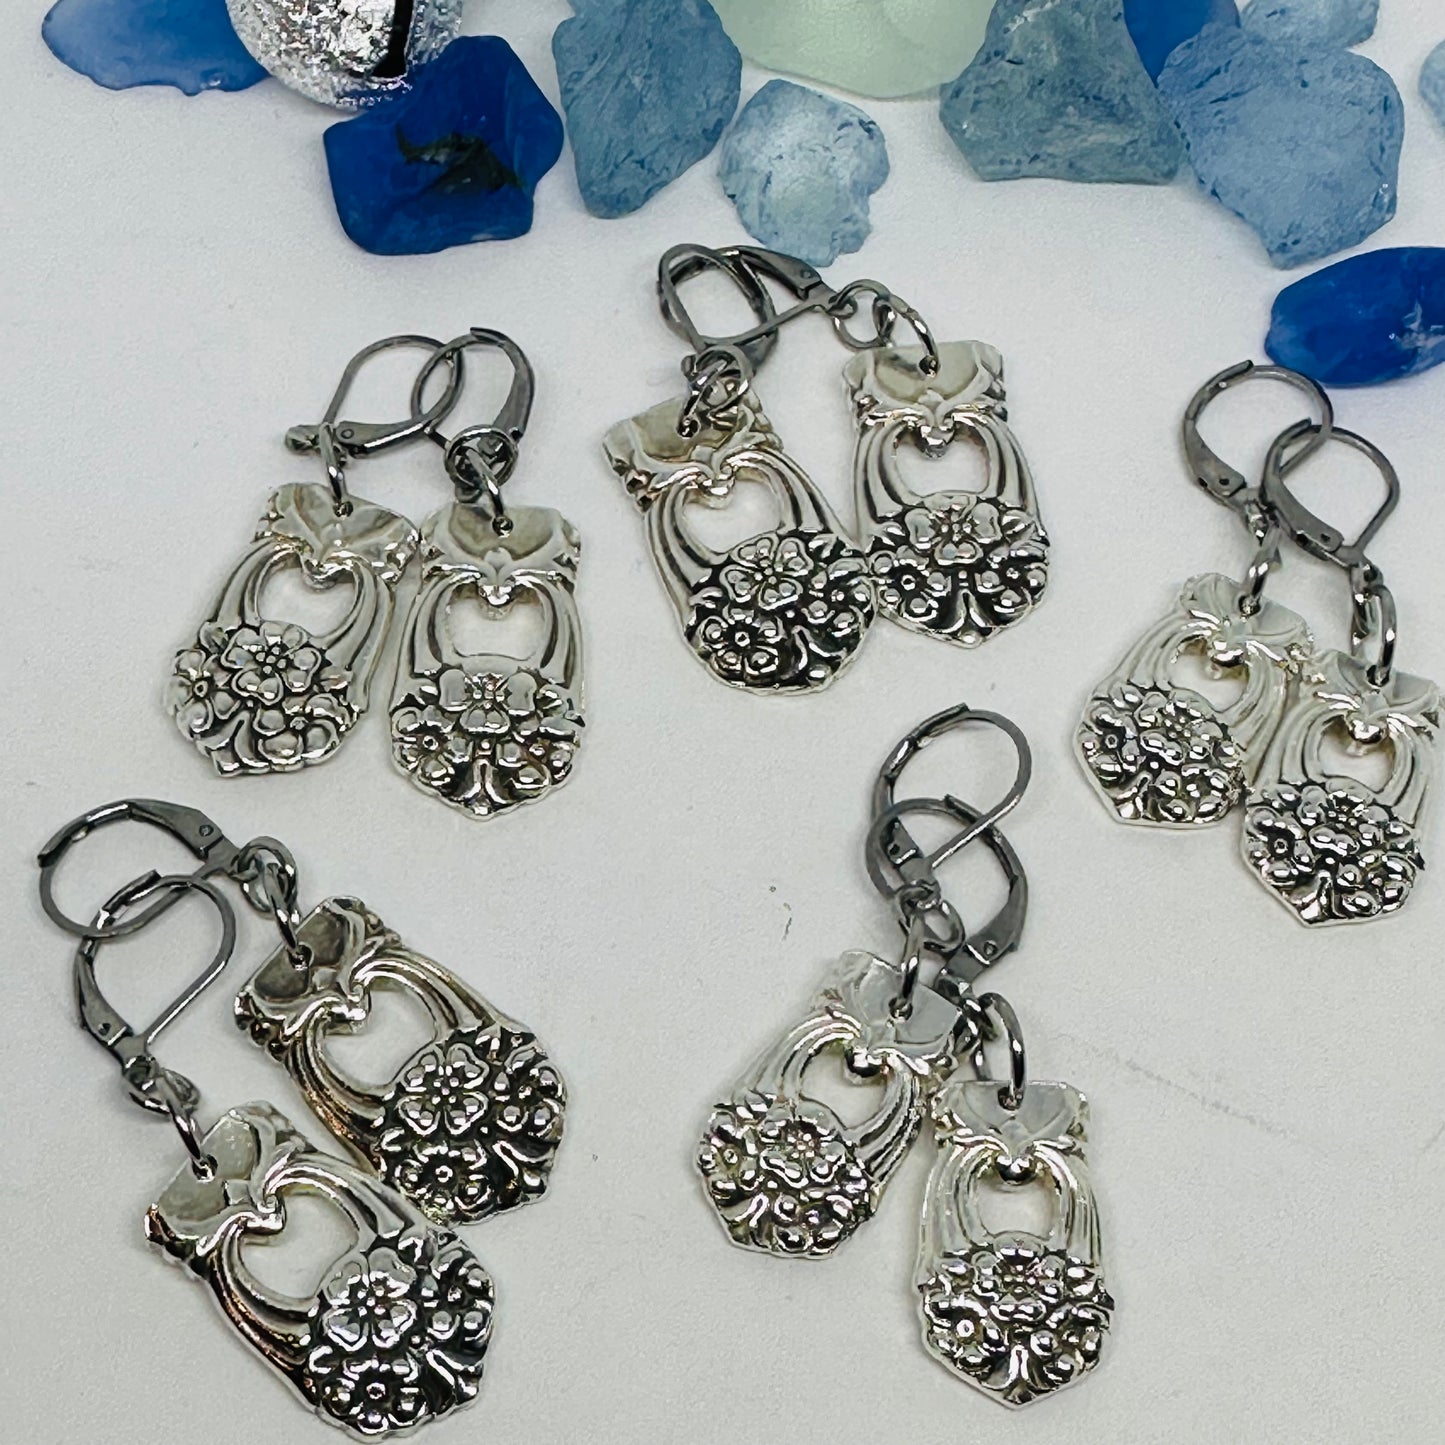 “Eternally Yours” 1941 Vintage Silverware Spoon Earrings | Up-Cycled Jewelry | Antique